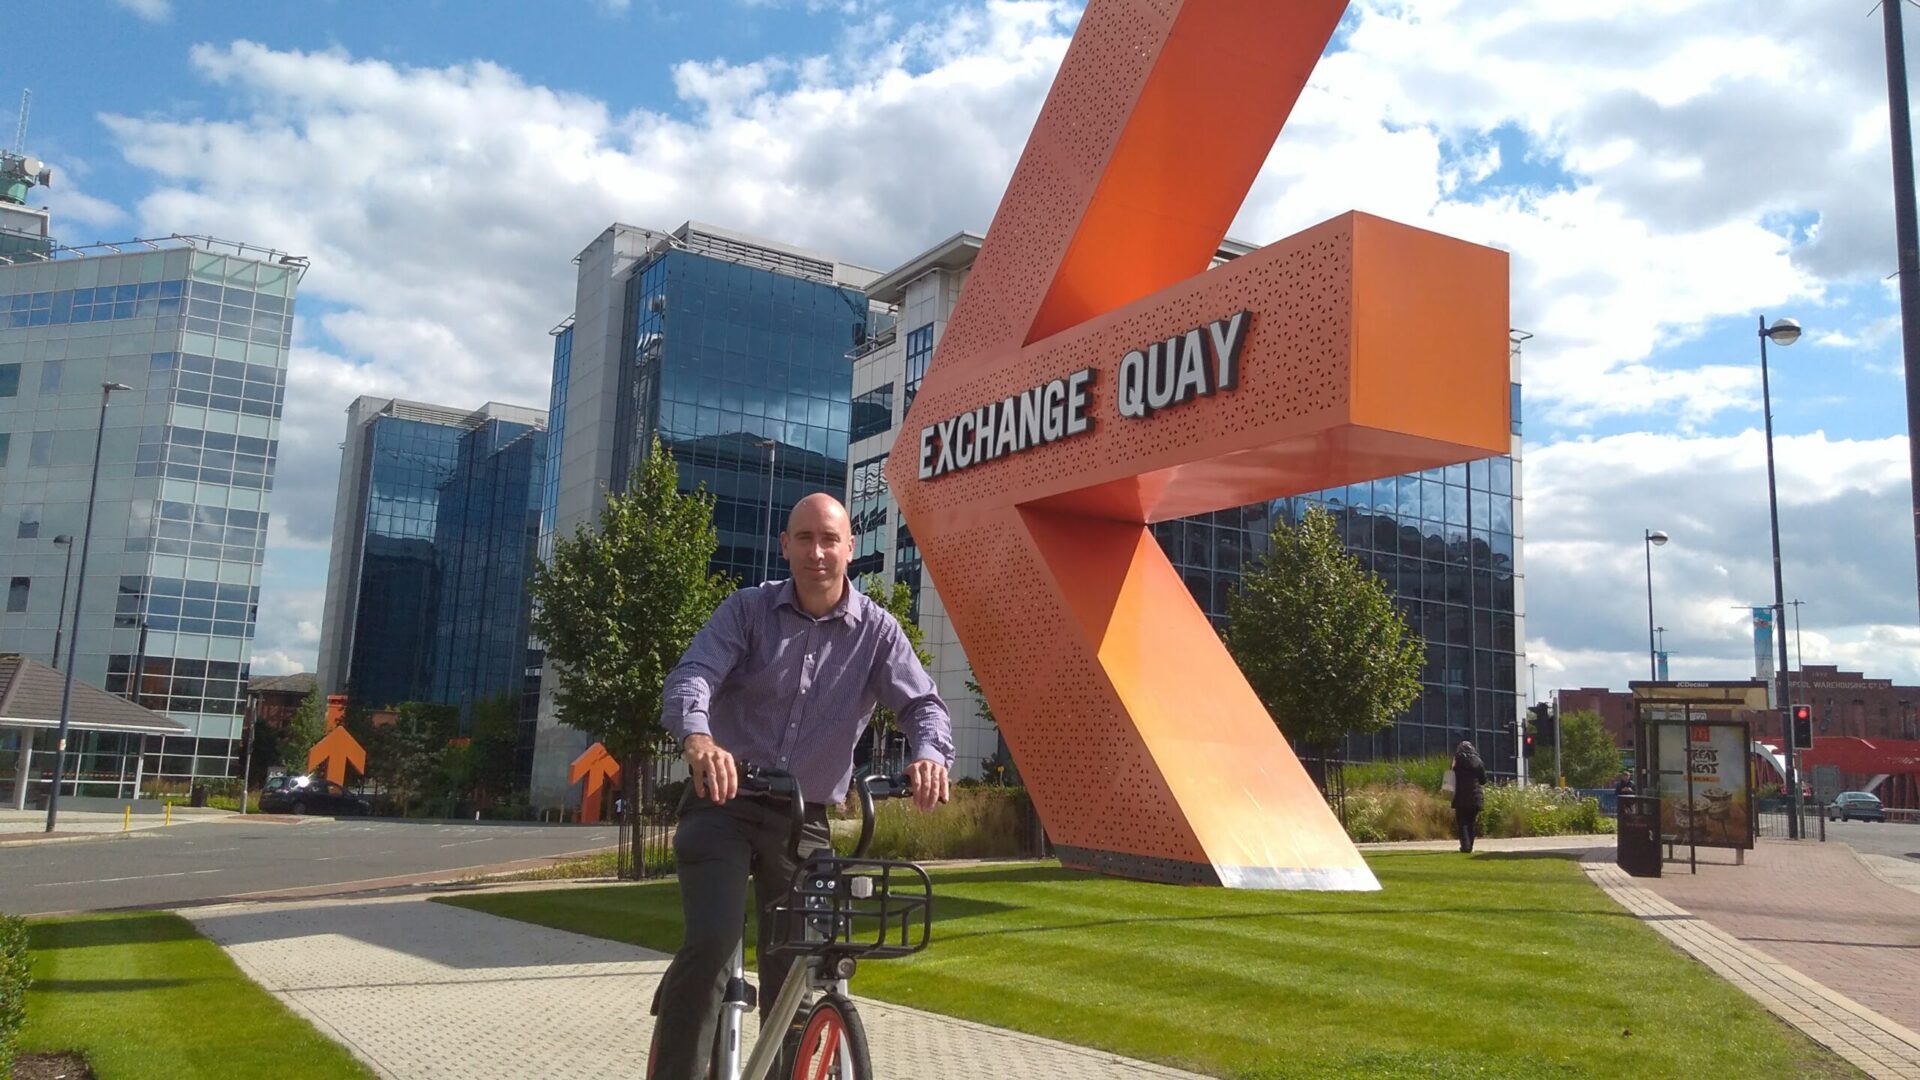 Iain Roberts on a Mobike at Exchange Quay